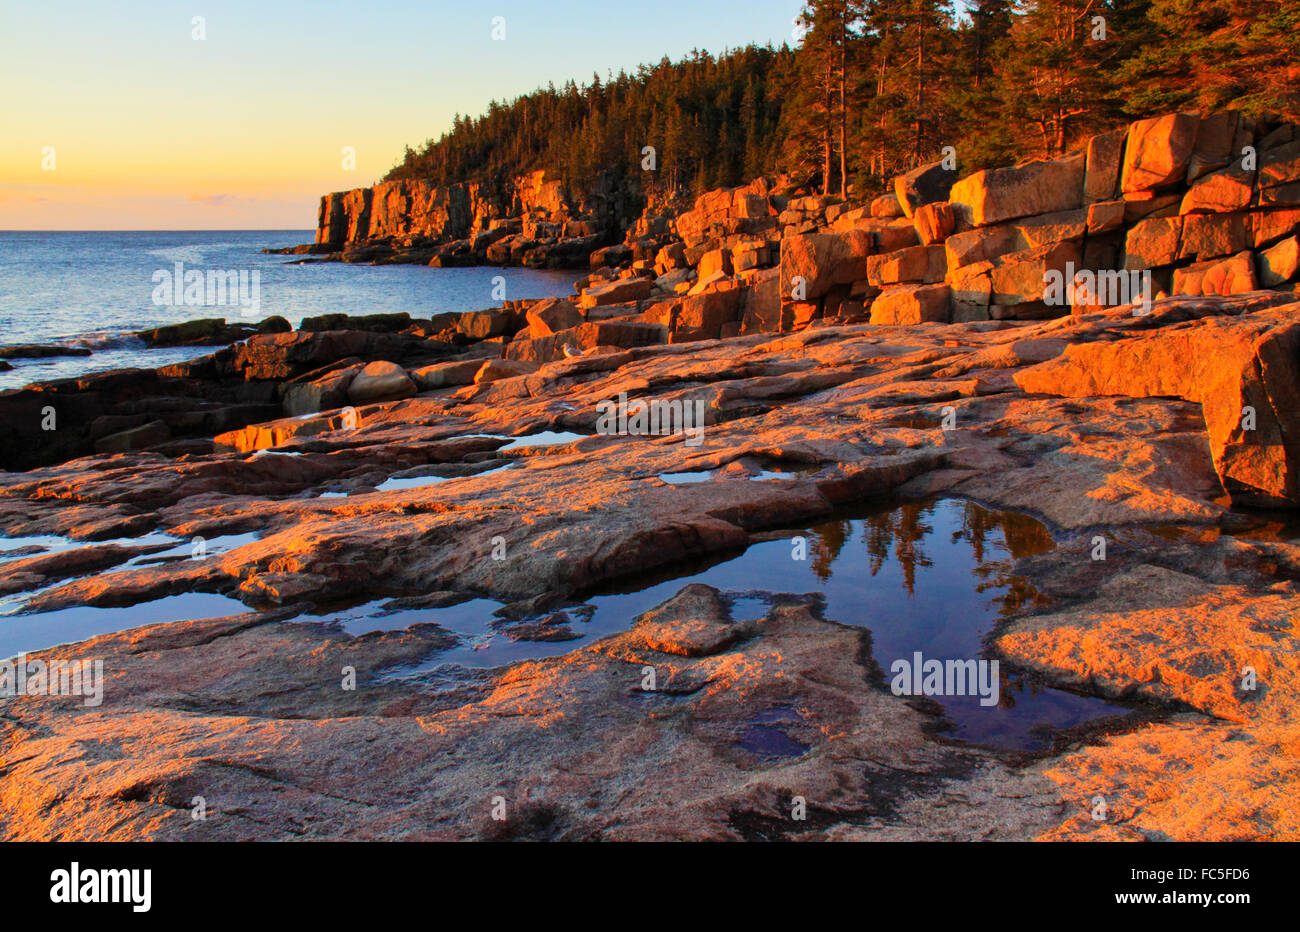 Otter Cliff at Sunrise, The Ocean Trail, Acadia National Park, Maine, USA Stock Photo